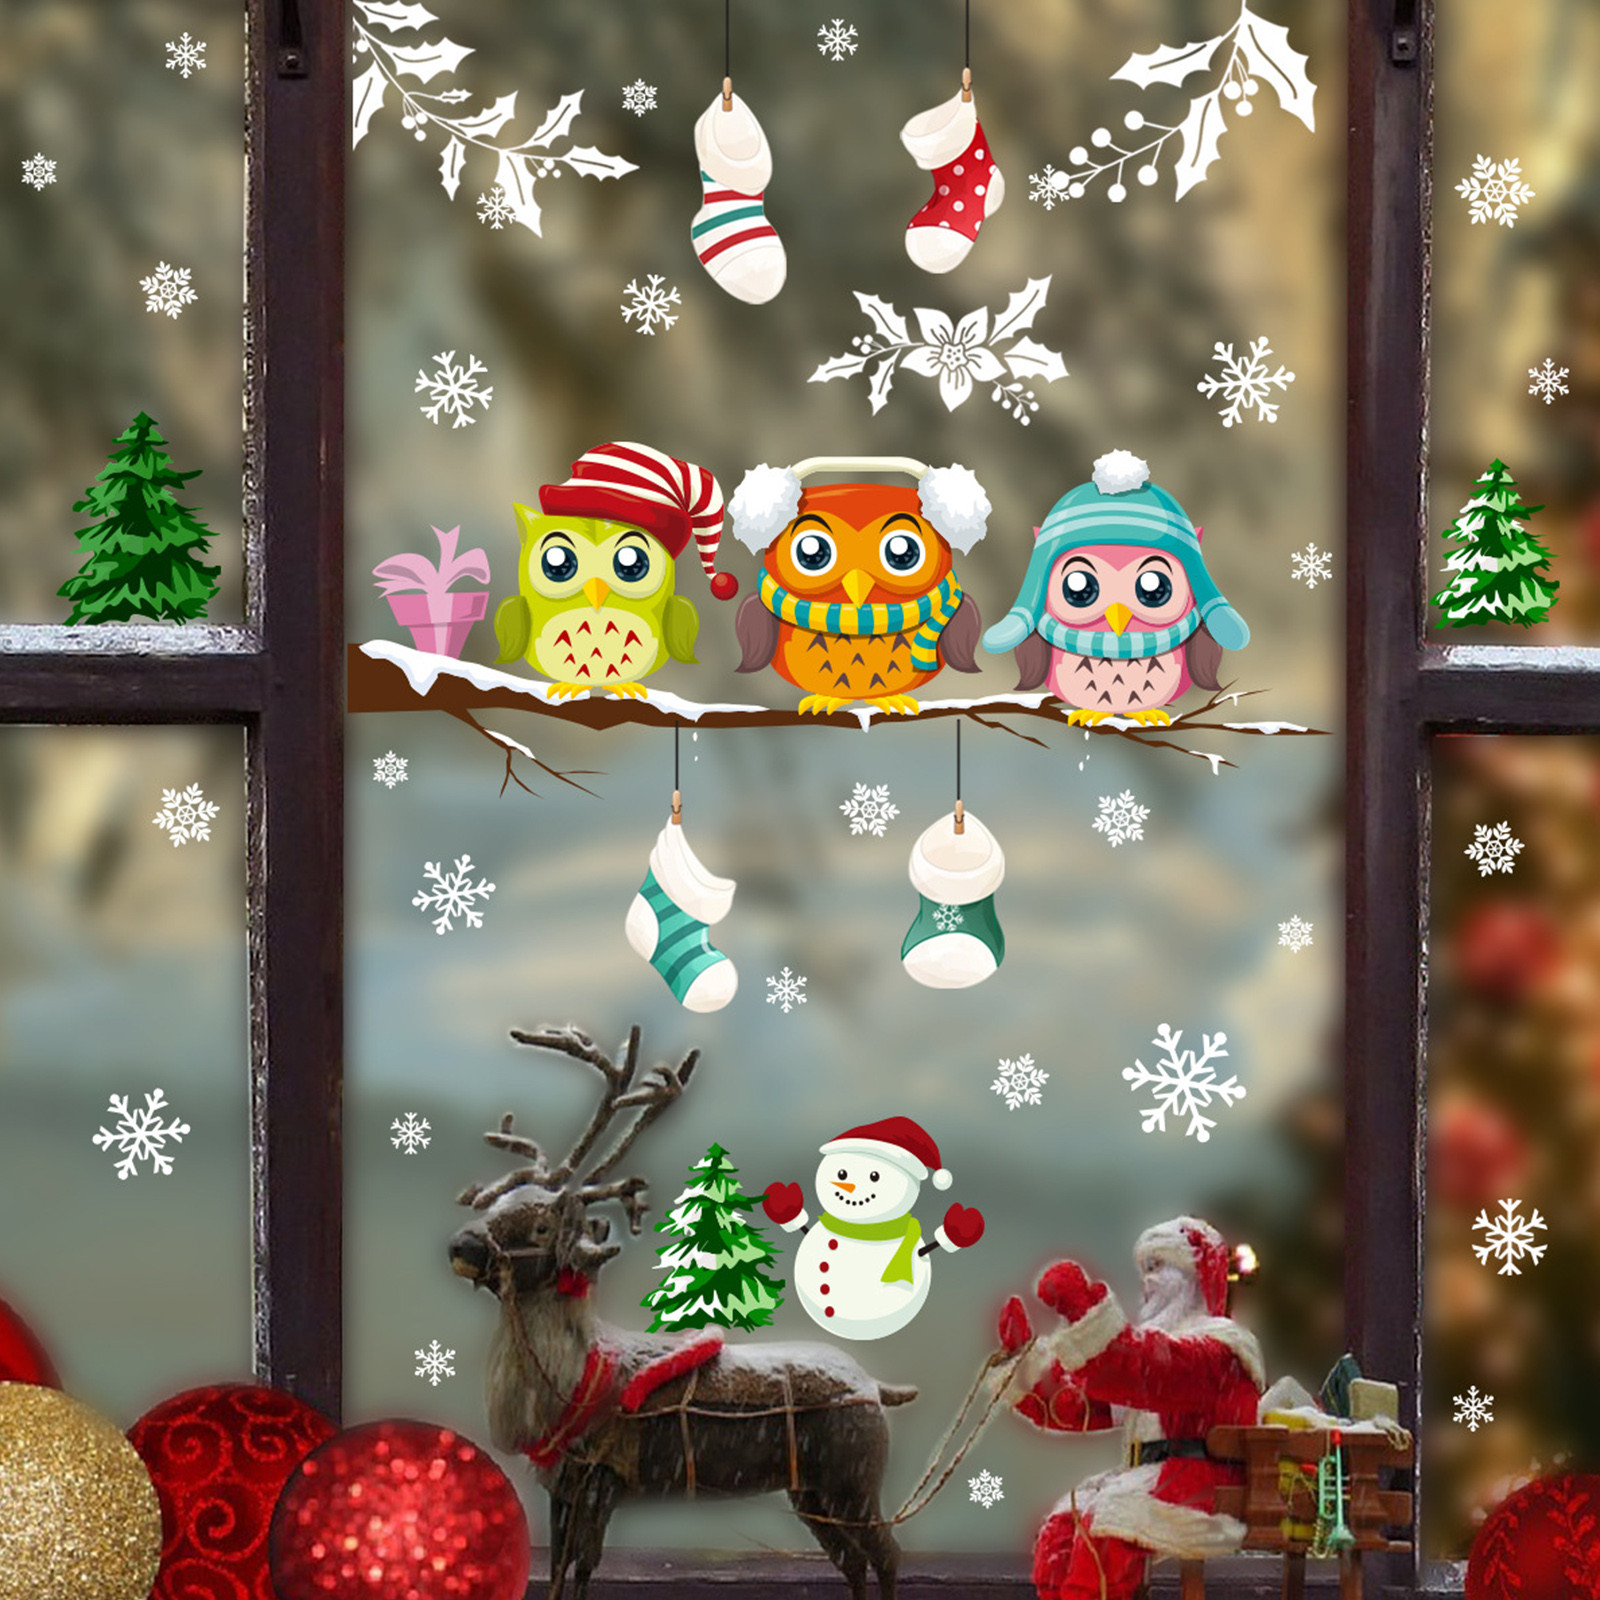 Merry Christmas Owl Images Wallpapers